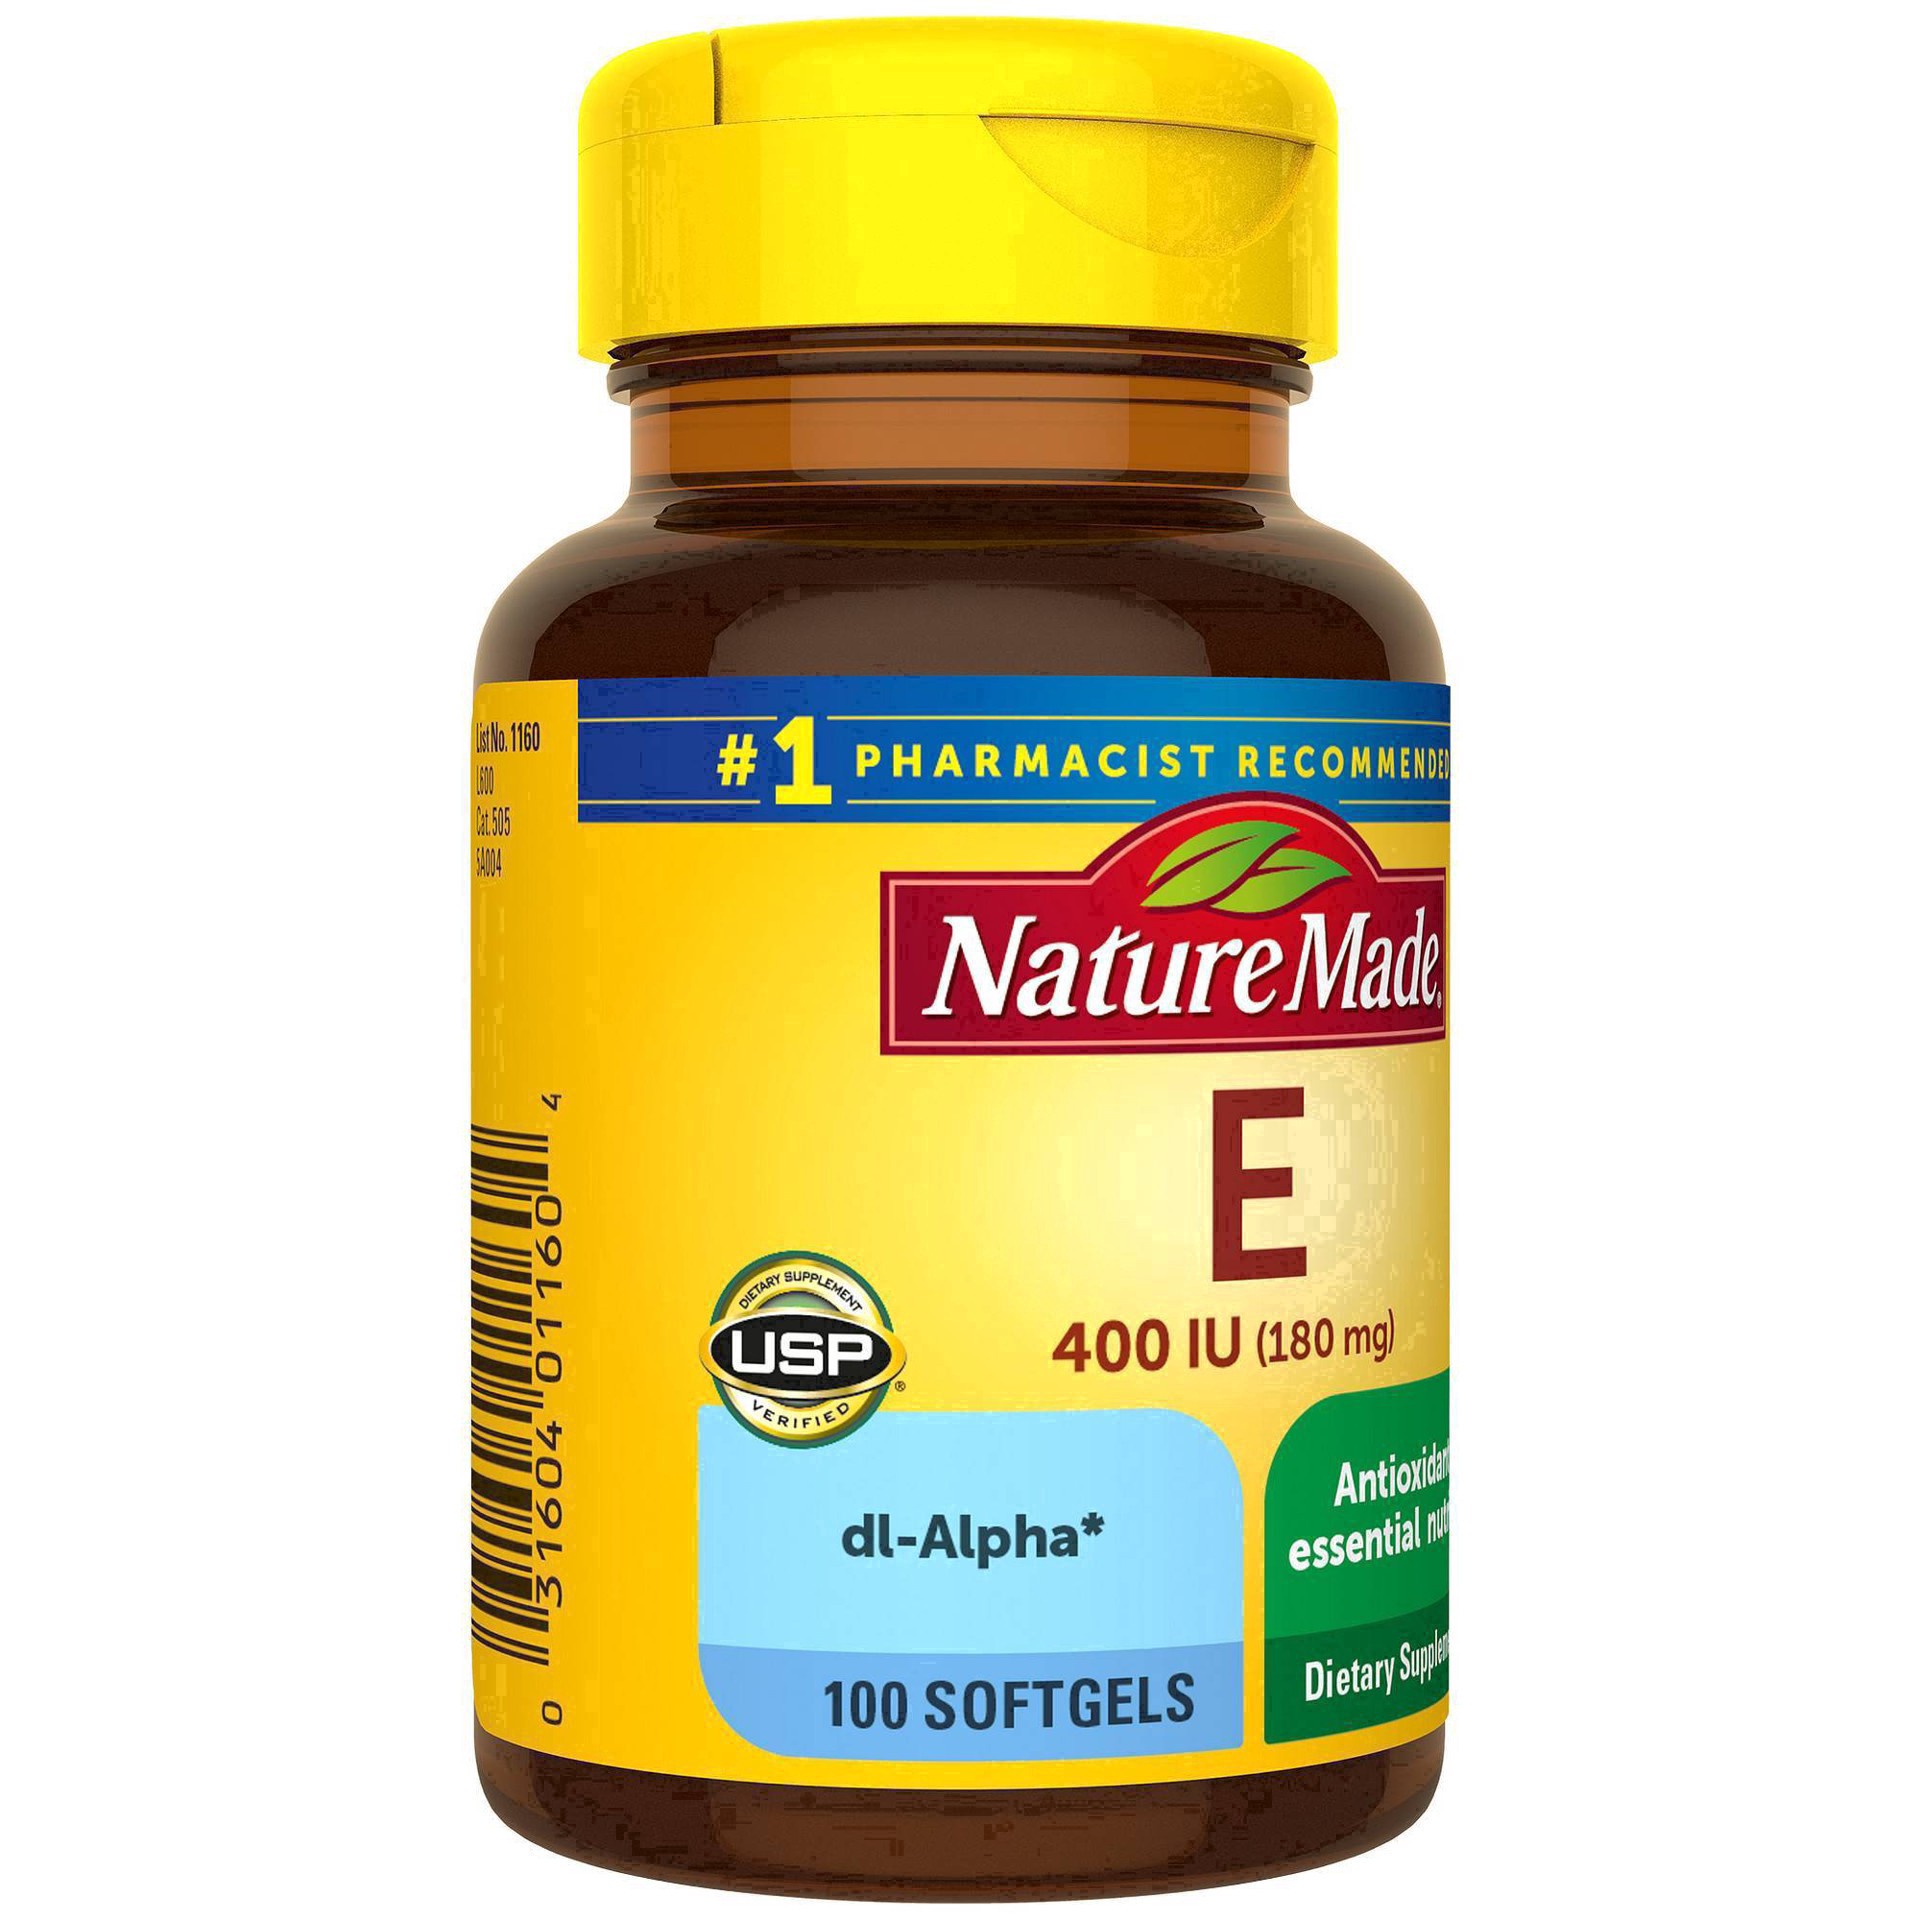 slide 29 of 74, Nature Made Vitamin E 180 mg (400 IU) dl-Alpha, Dietary Supplement for Antioxidant Support, 100 Softgels, 100 Day Supply, 100 ct